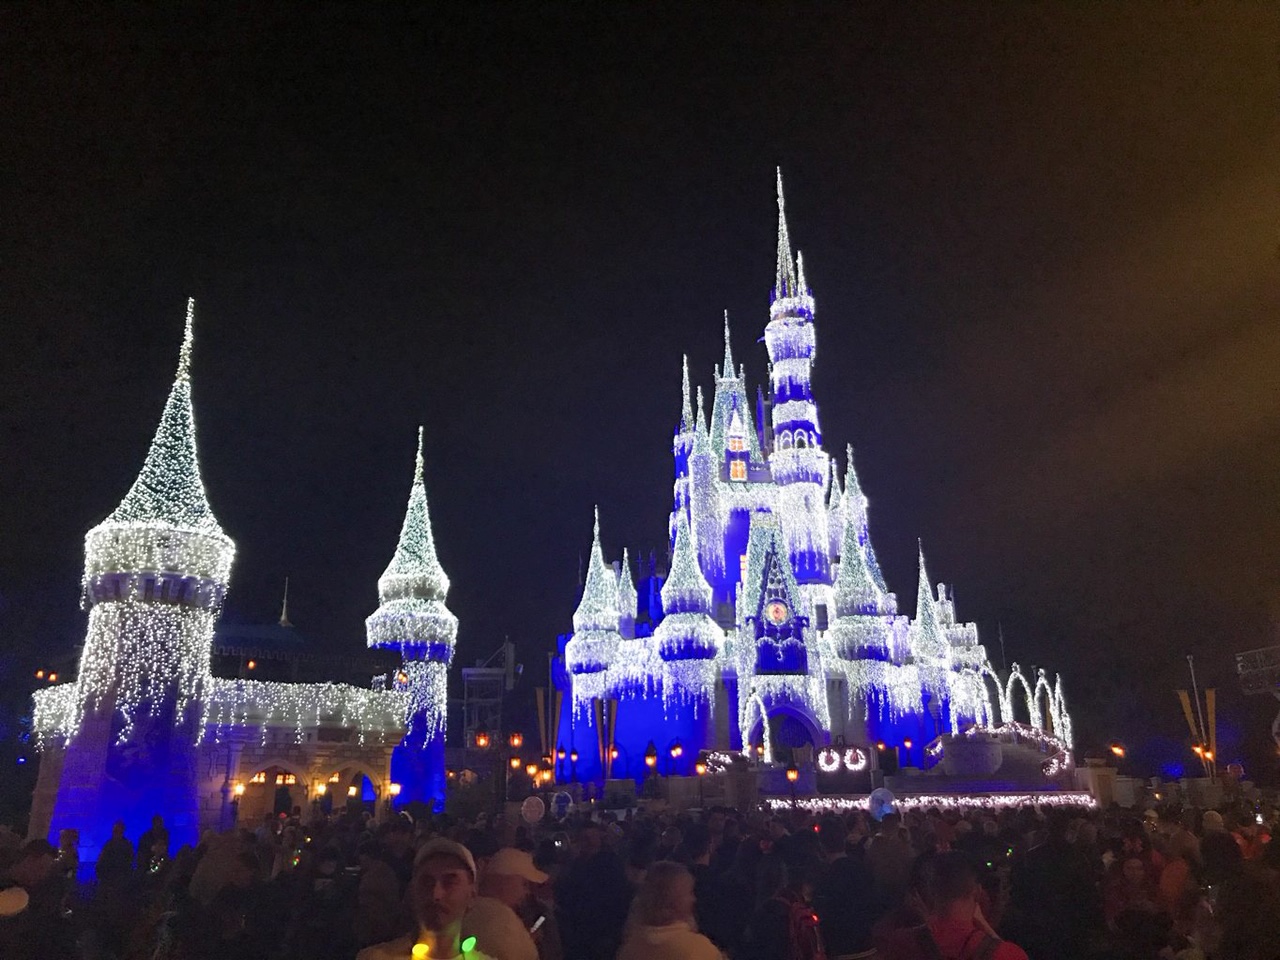 night view from the side of Cinderella Castle with icicle lights for Christmas